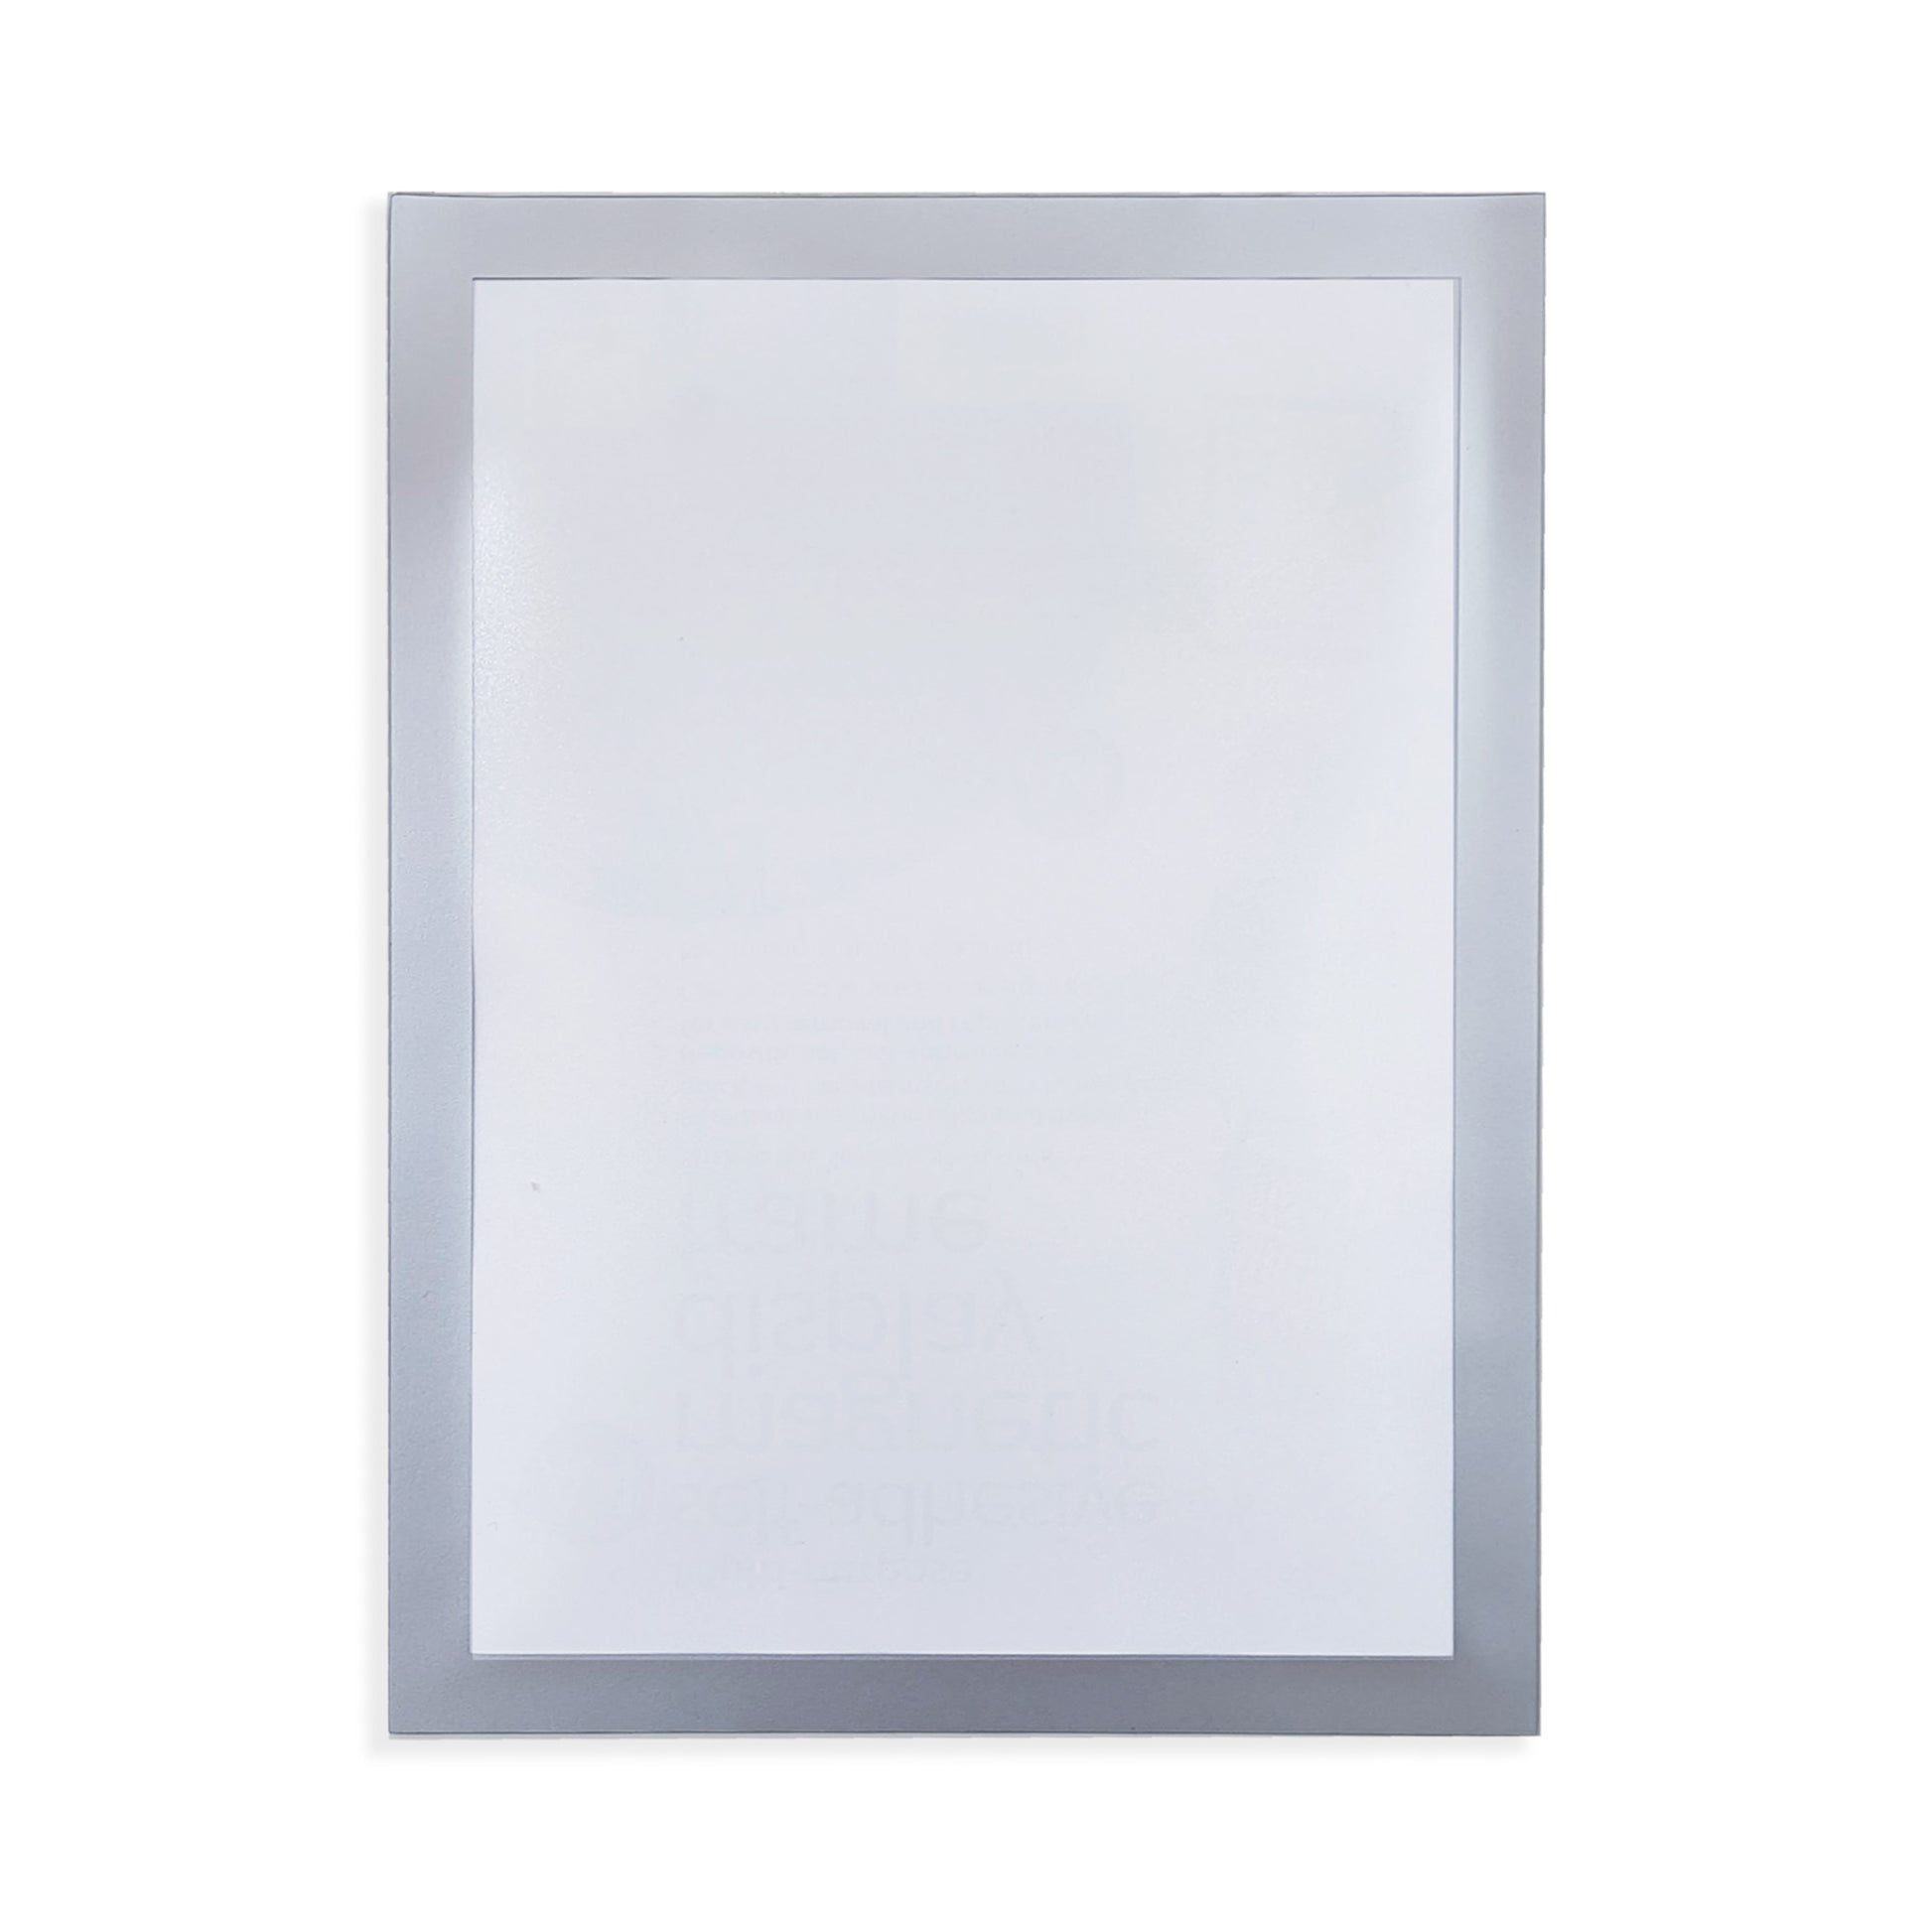 A clear A4 self-adhesive magnetic display frame with a silver border, empty and ready for custom inserts. The translucent quality of the surface allows for easy viewing of documents or signs placed within.